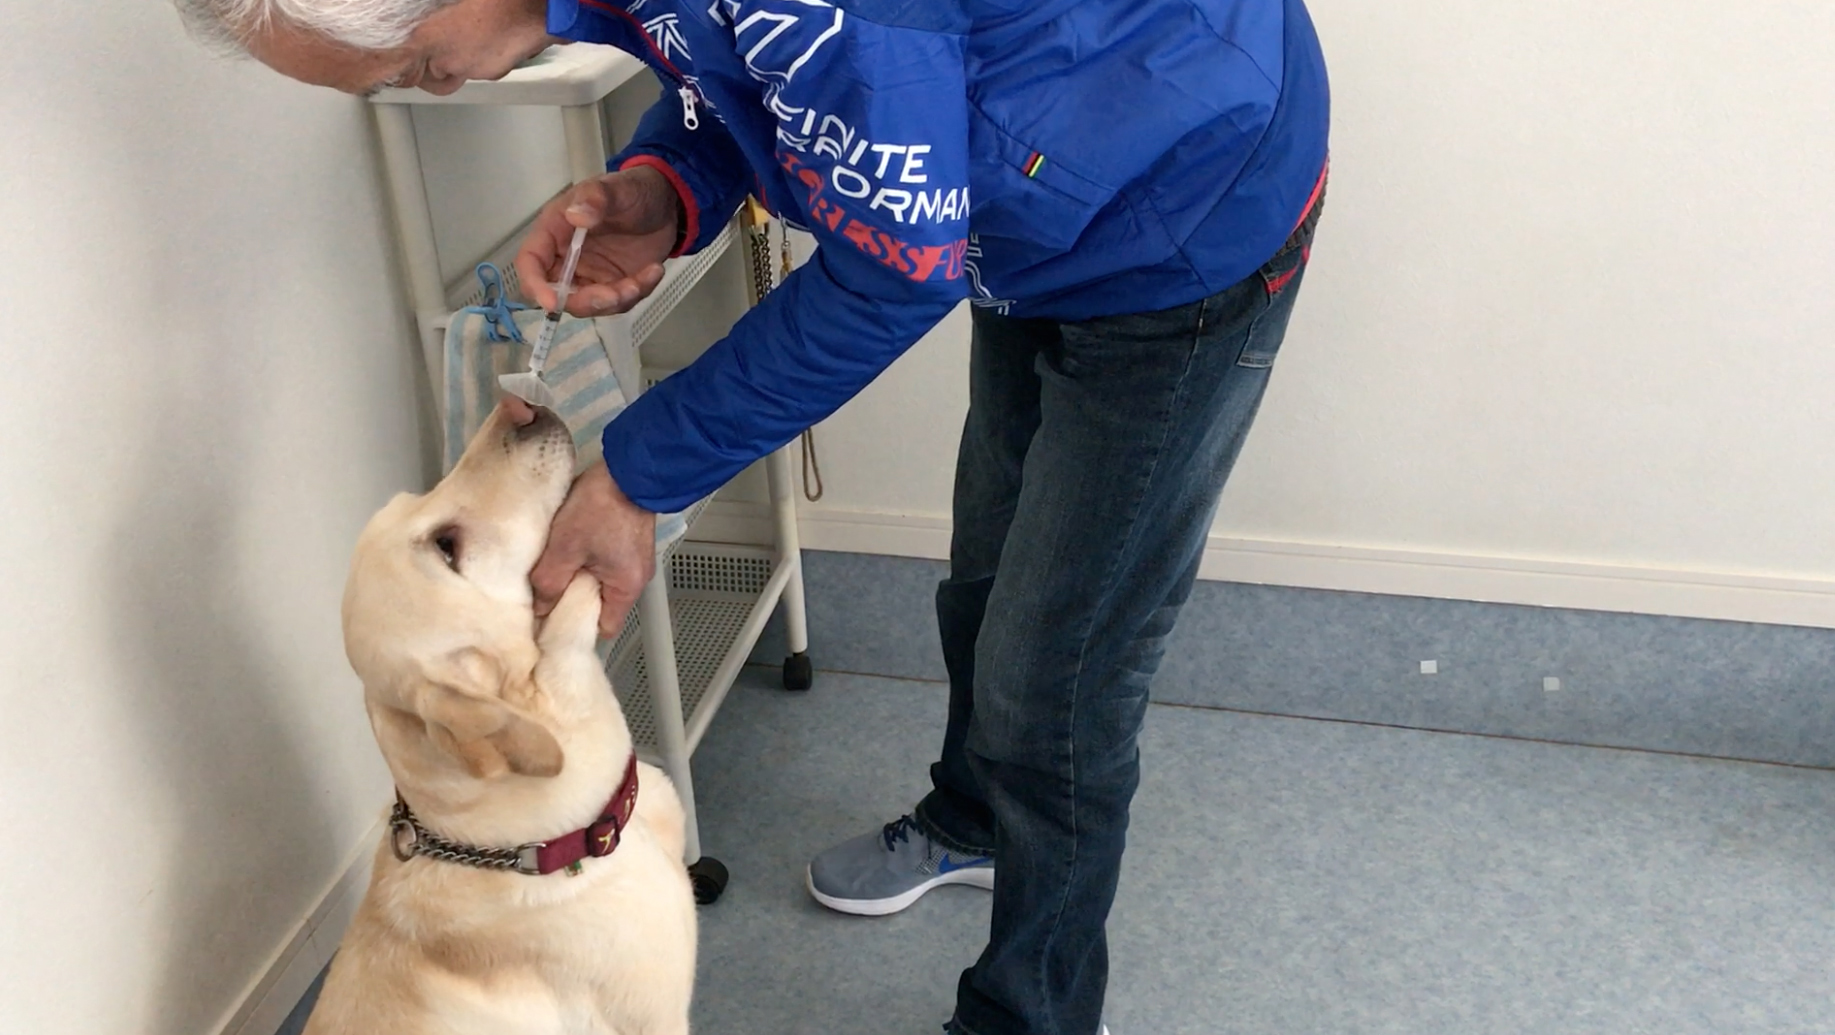 Bee, a female Labrador retriever at St. Sugar Japan, a dog training center in Tateyama, Chiba Prefecture, is prompted to remember the smell of cancerous cells as part of  a training exercise. | TOWN OF KANEYAMA